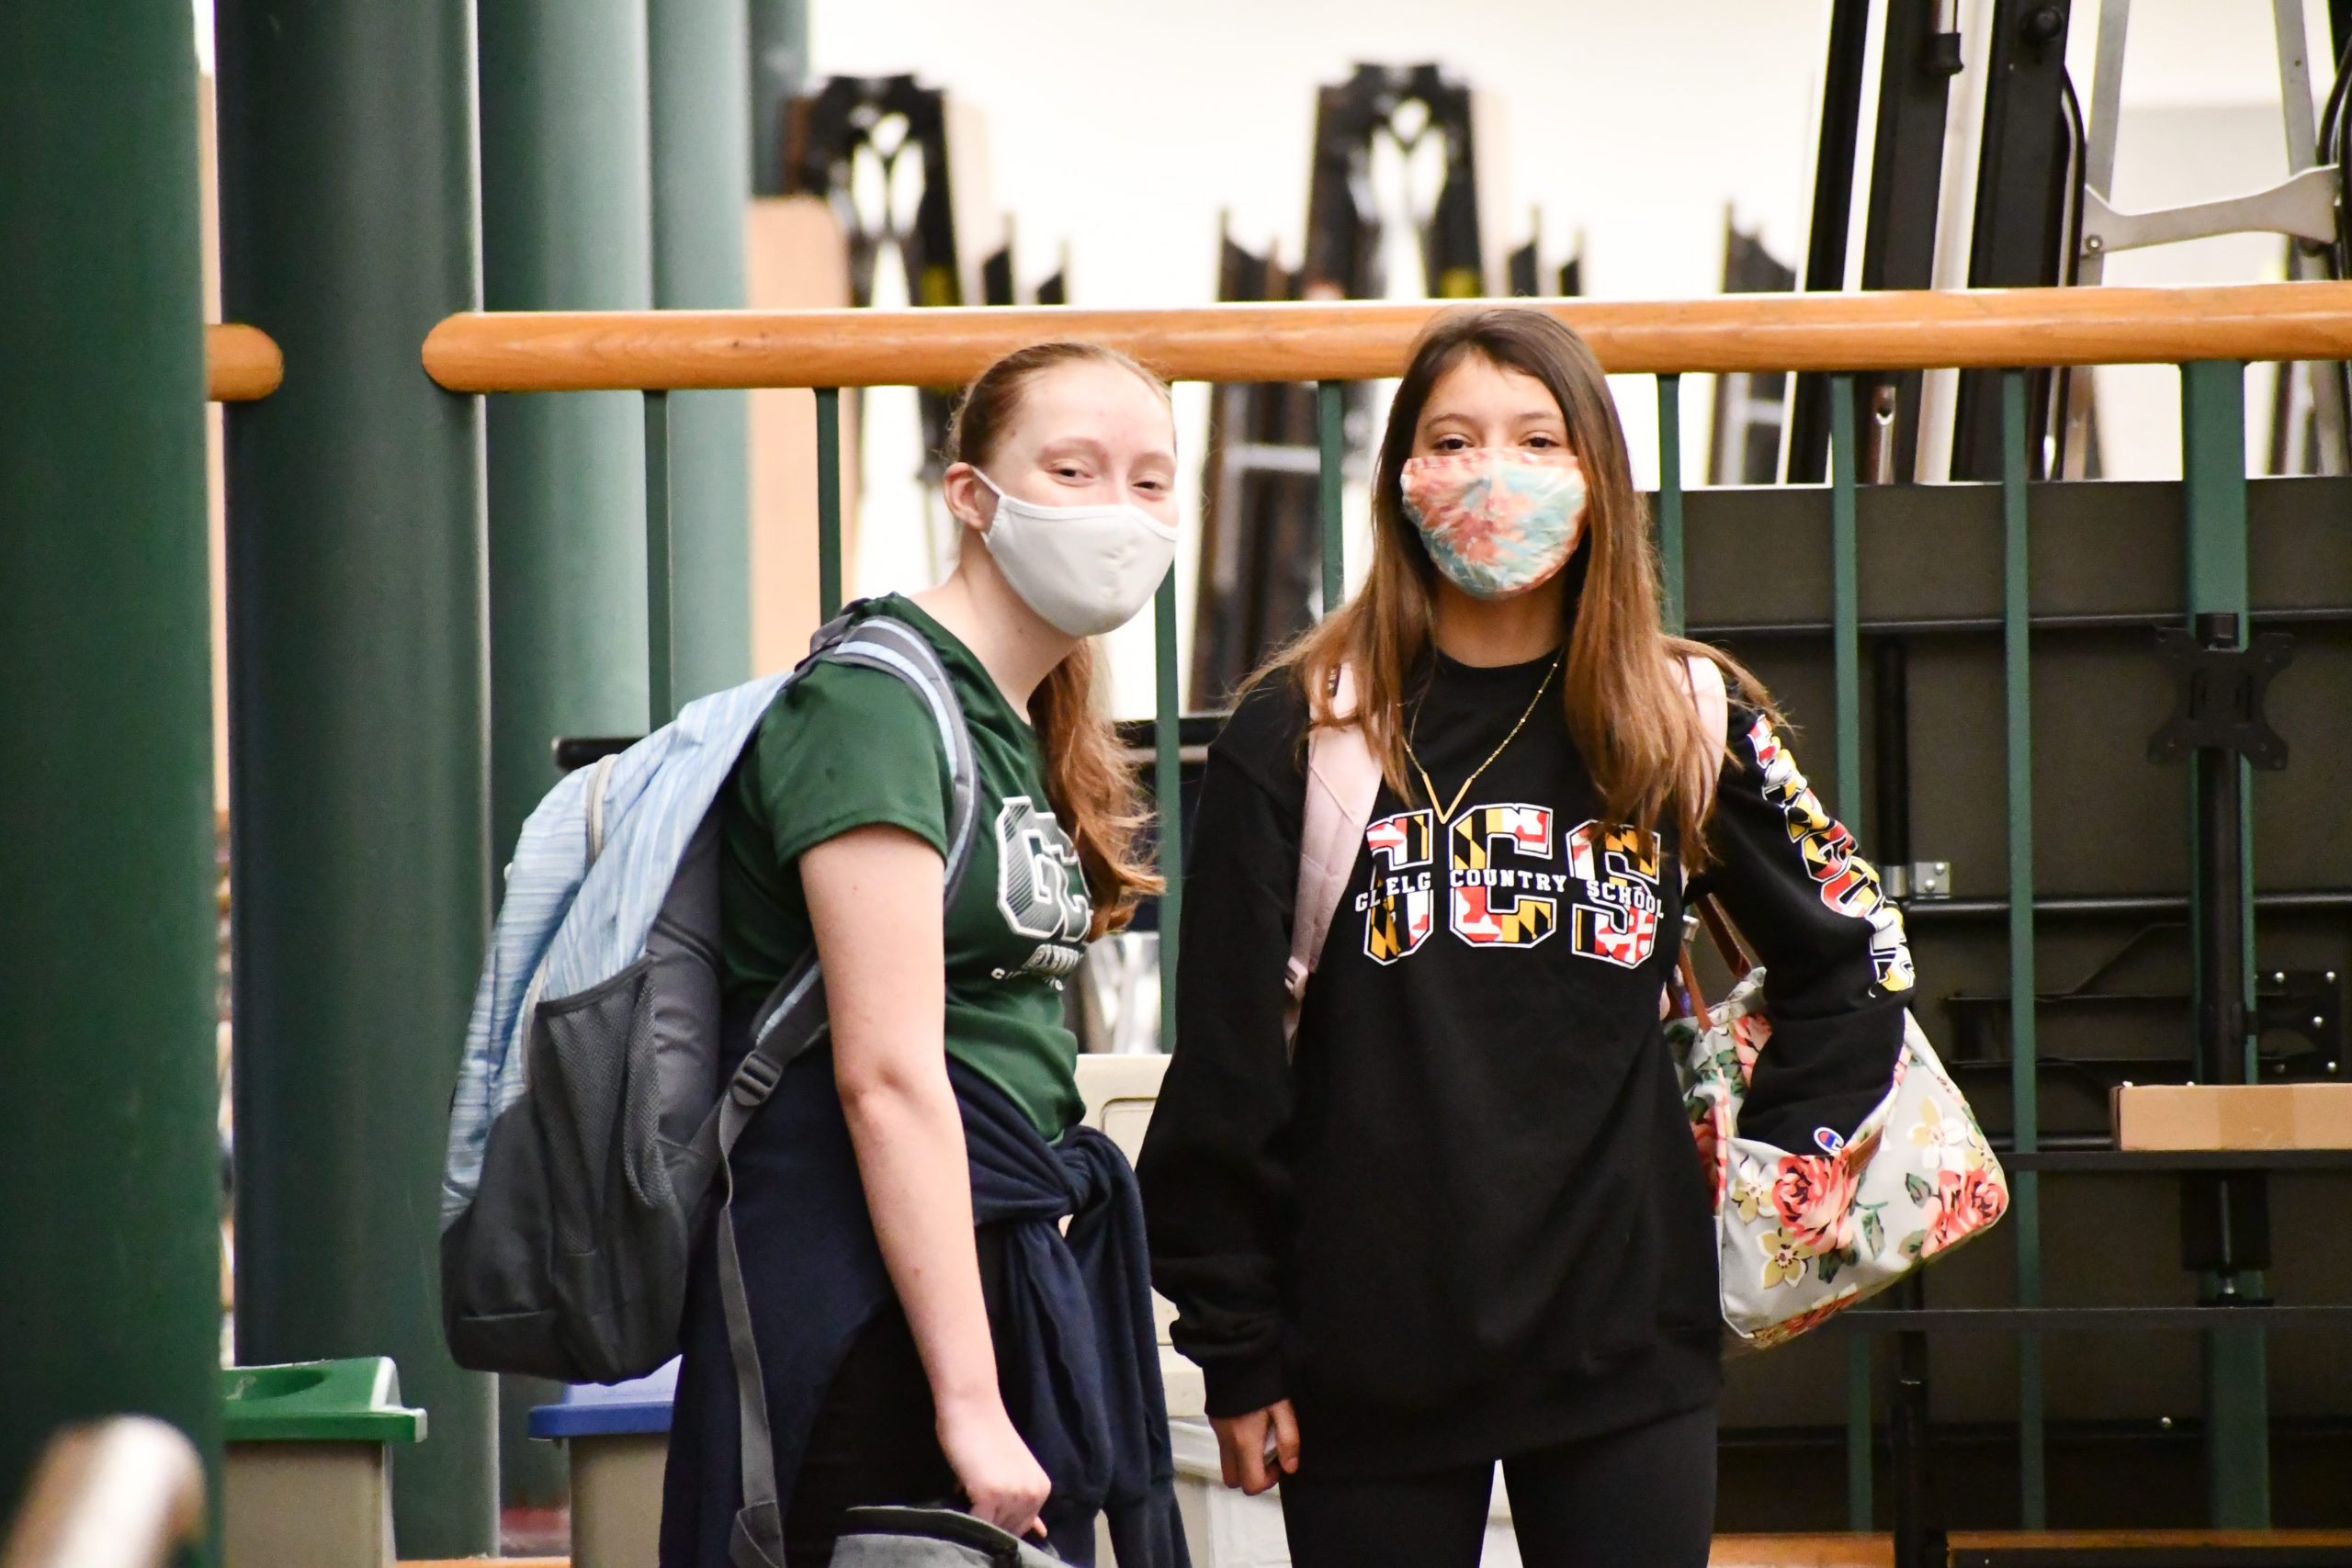 Two female students wearing masks stand in front of a railing inside the school.